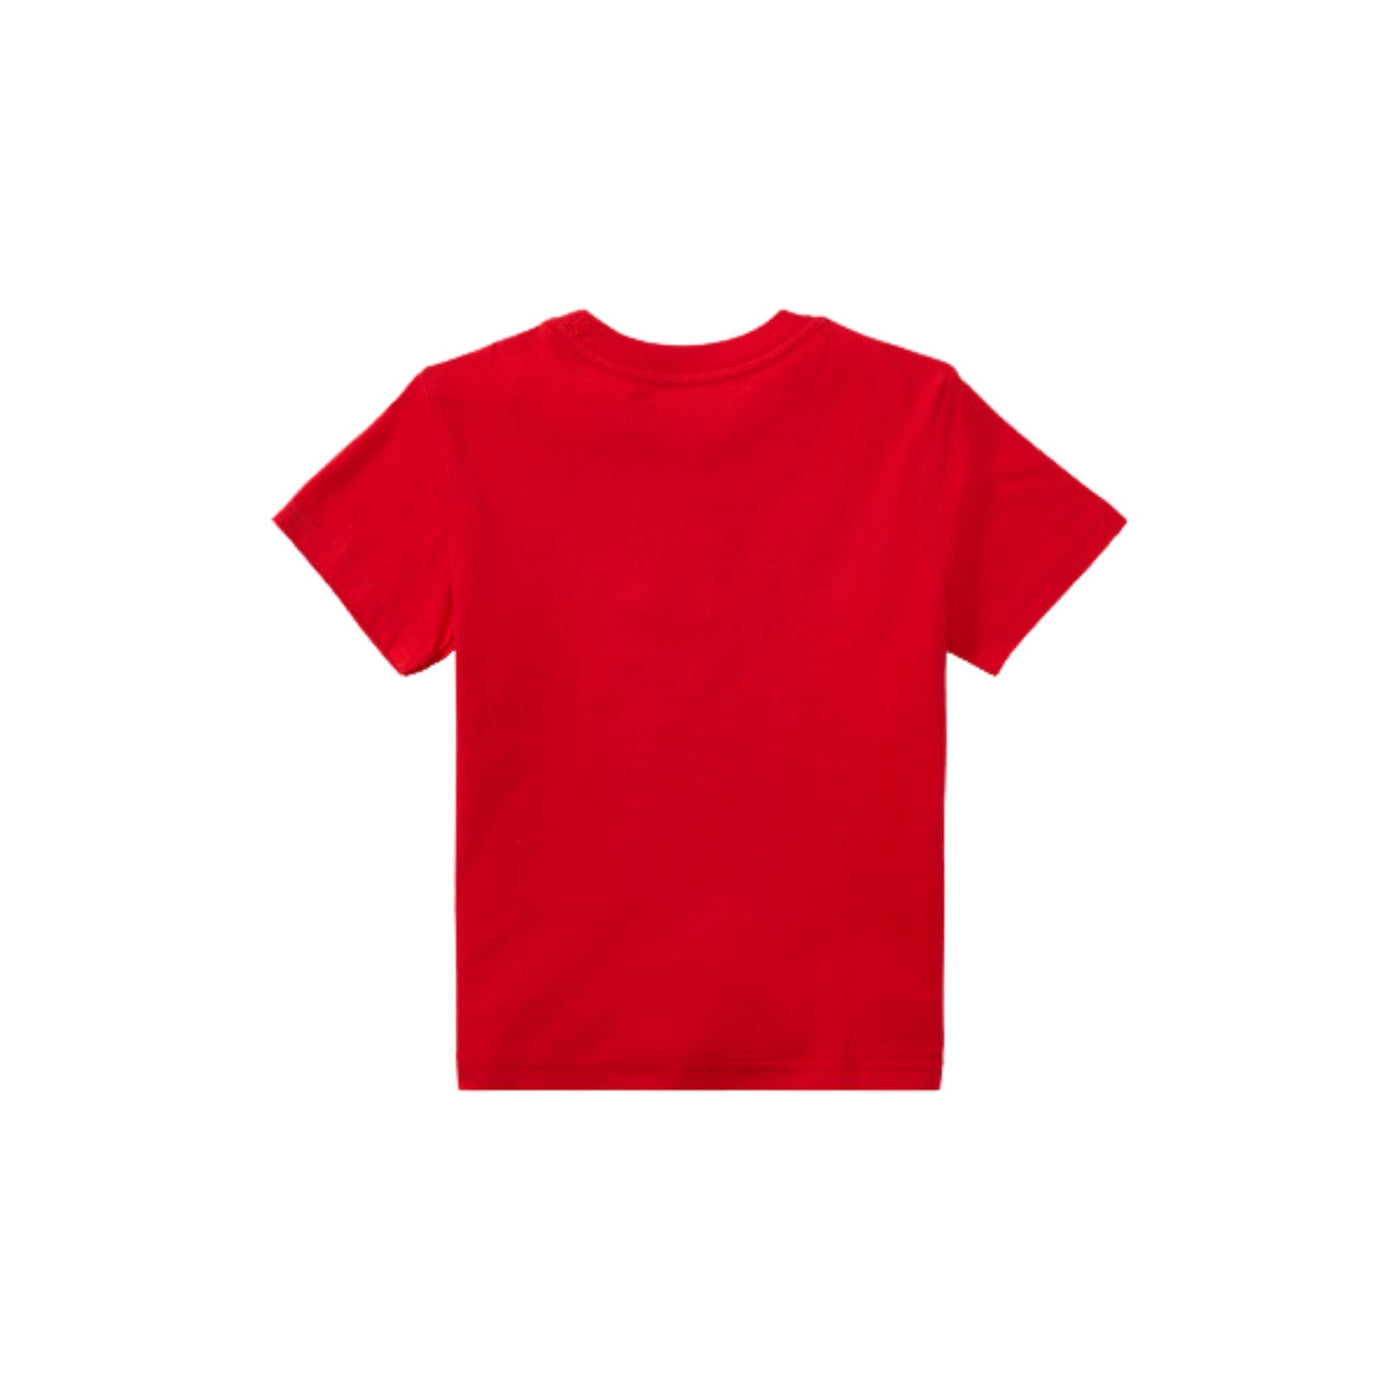 Baby T-shirt in soft cotton jersey